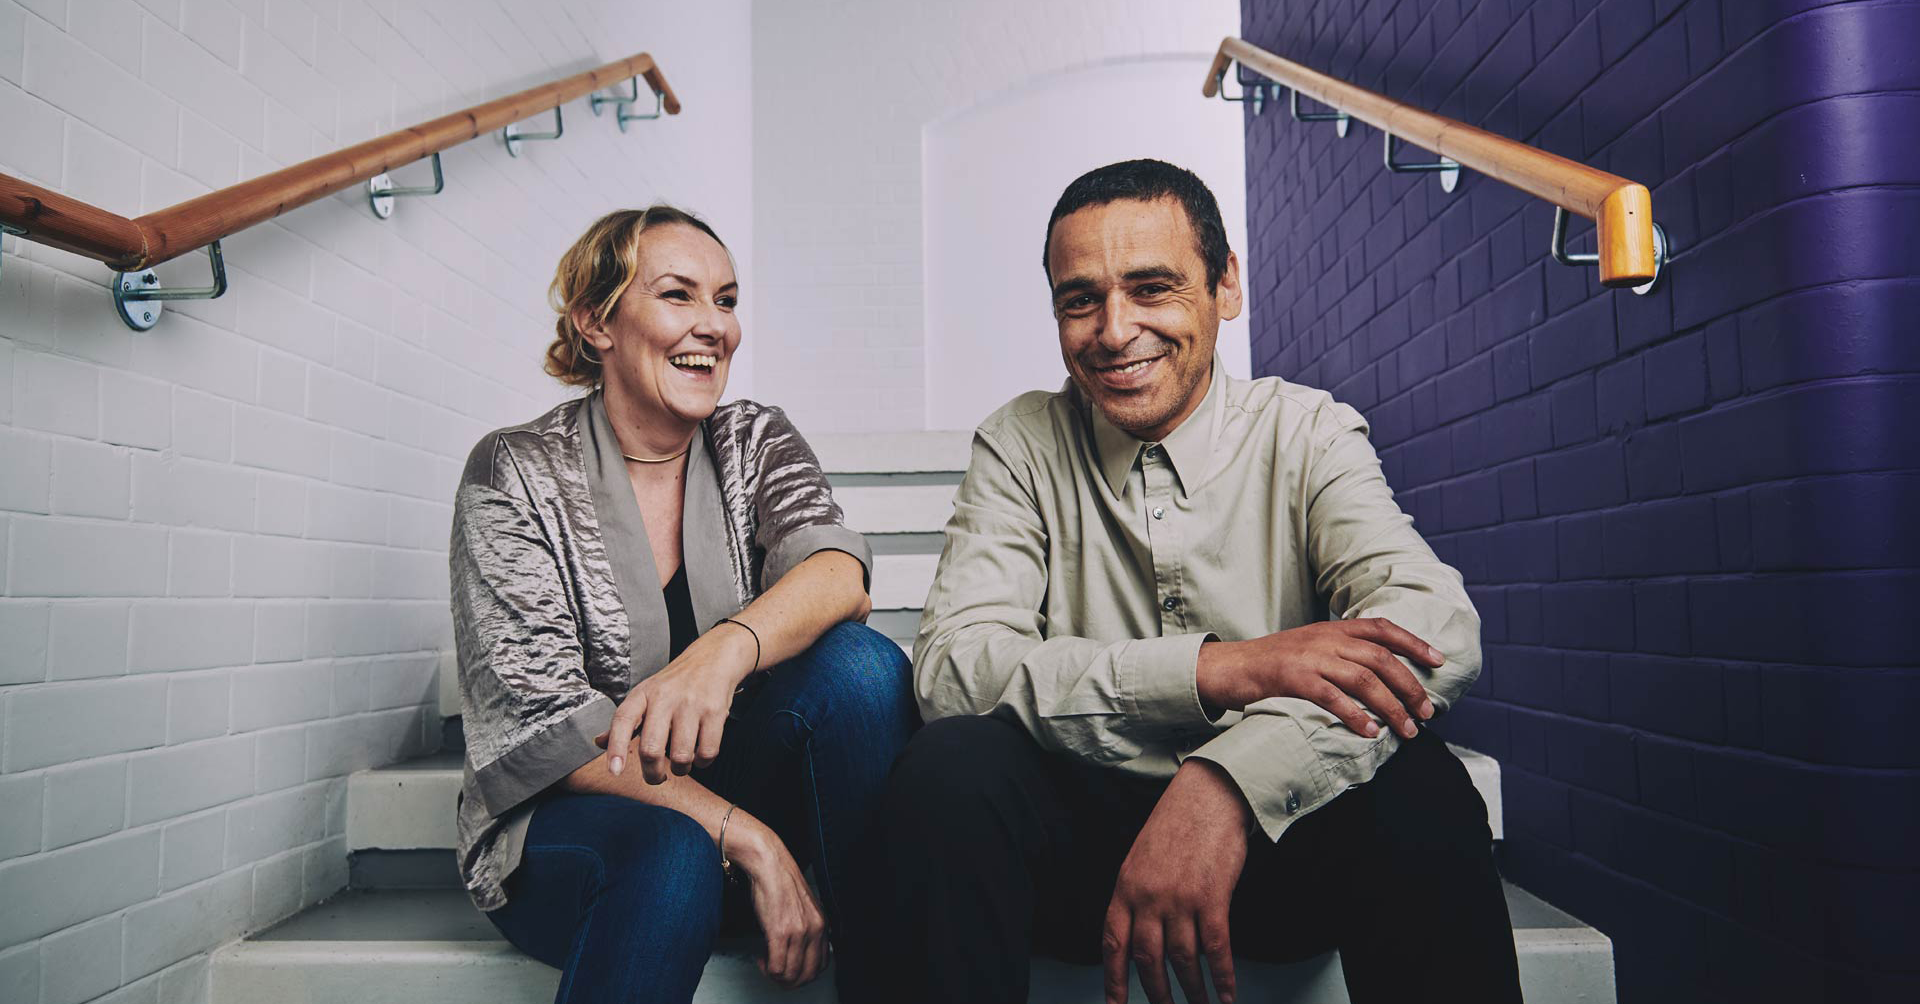 two people sitting on the stairs smiling